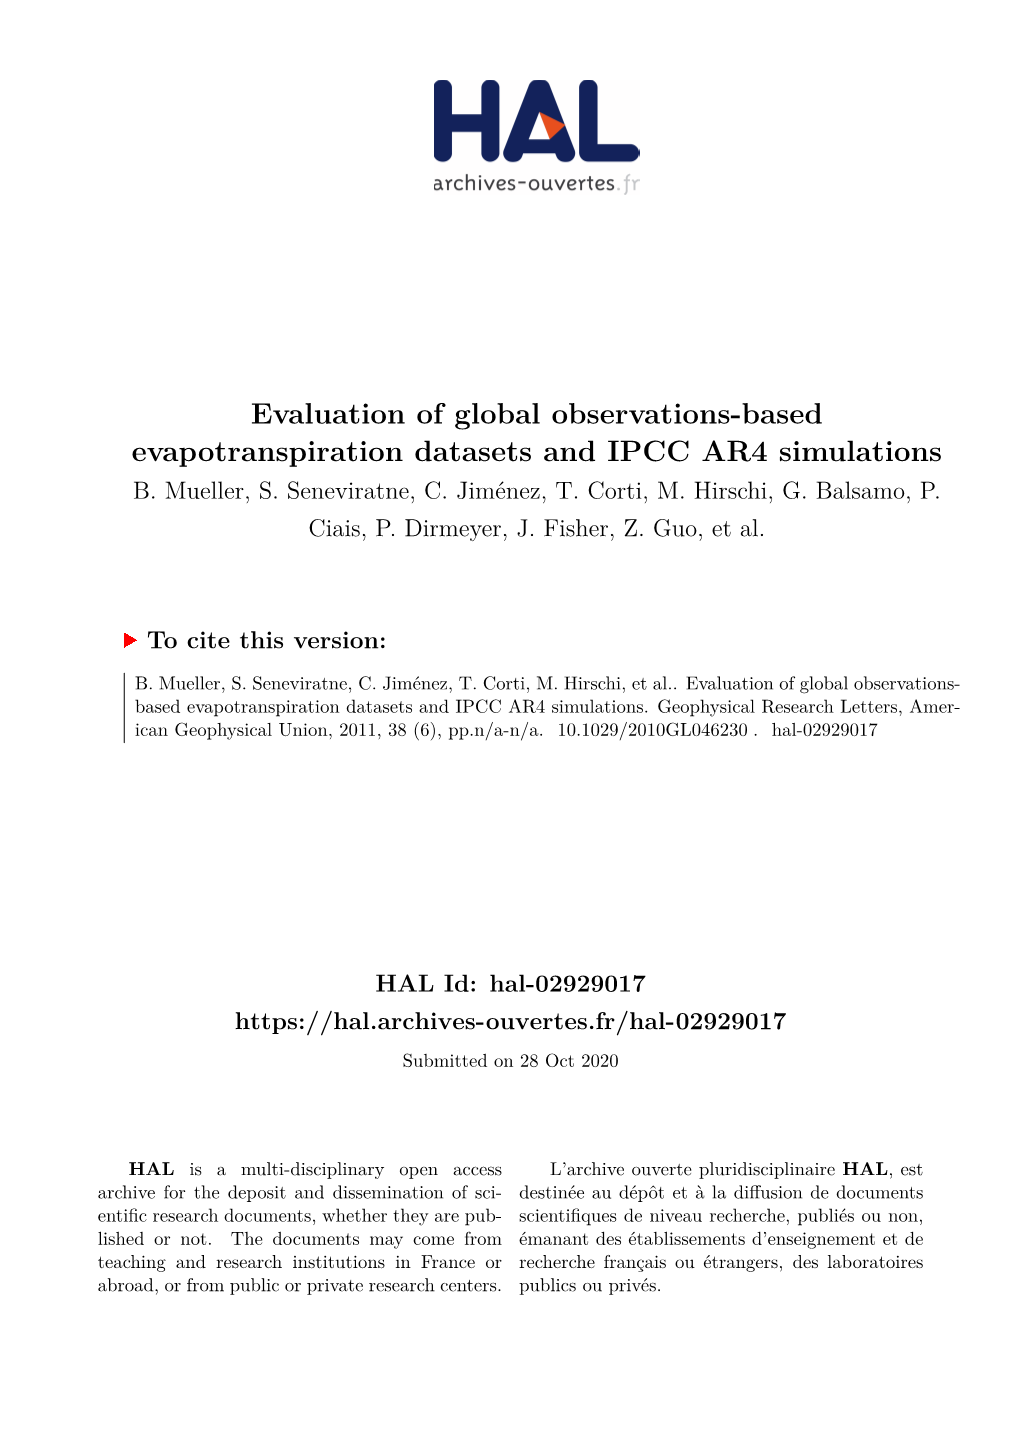 Evaluation of Global Observations-Based Evapotranspiration Datasets and IPCC AR4 Simulations B